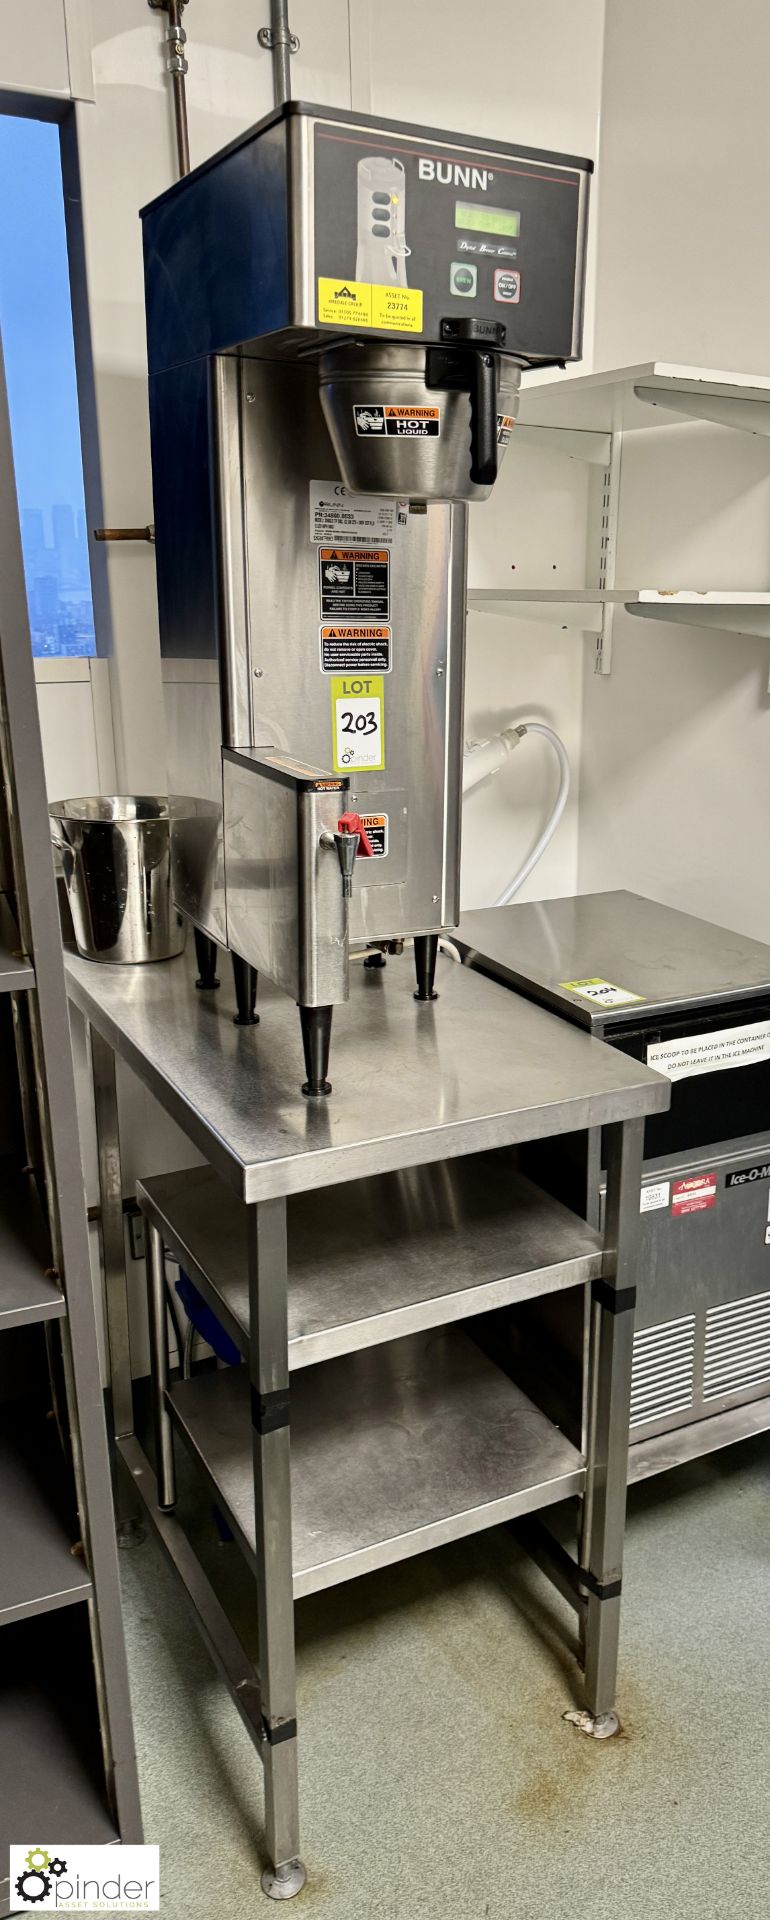 Bunn single TF DBC Coffee Brewer, 240volts (location in building - level 23 kitchen)